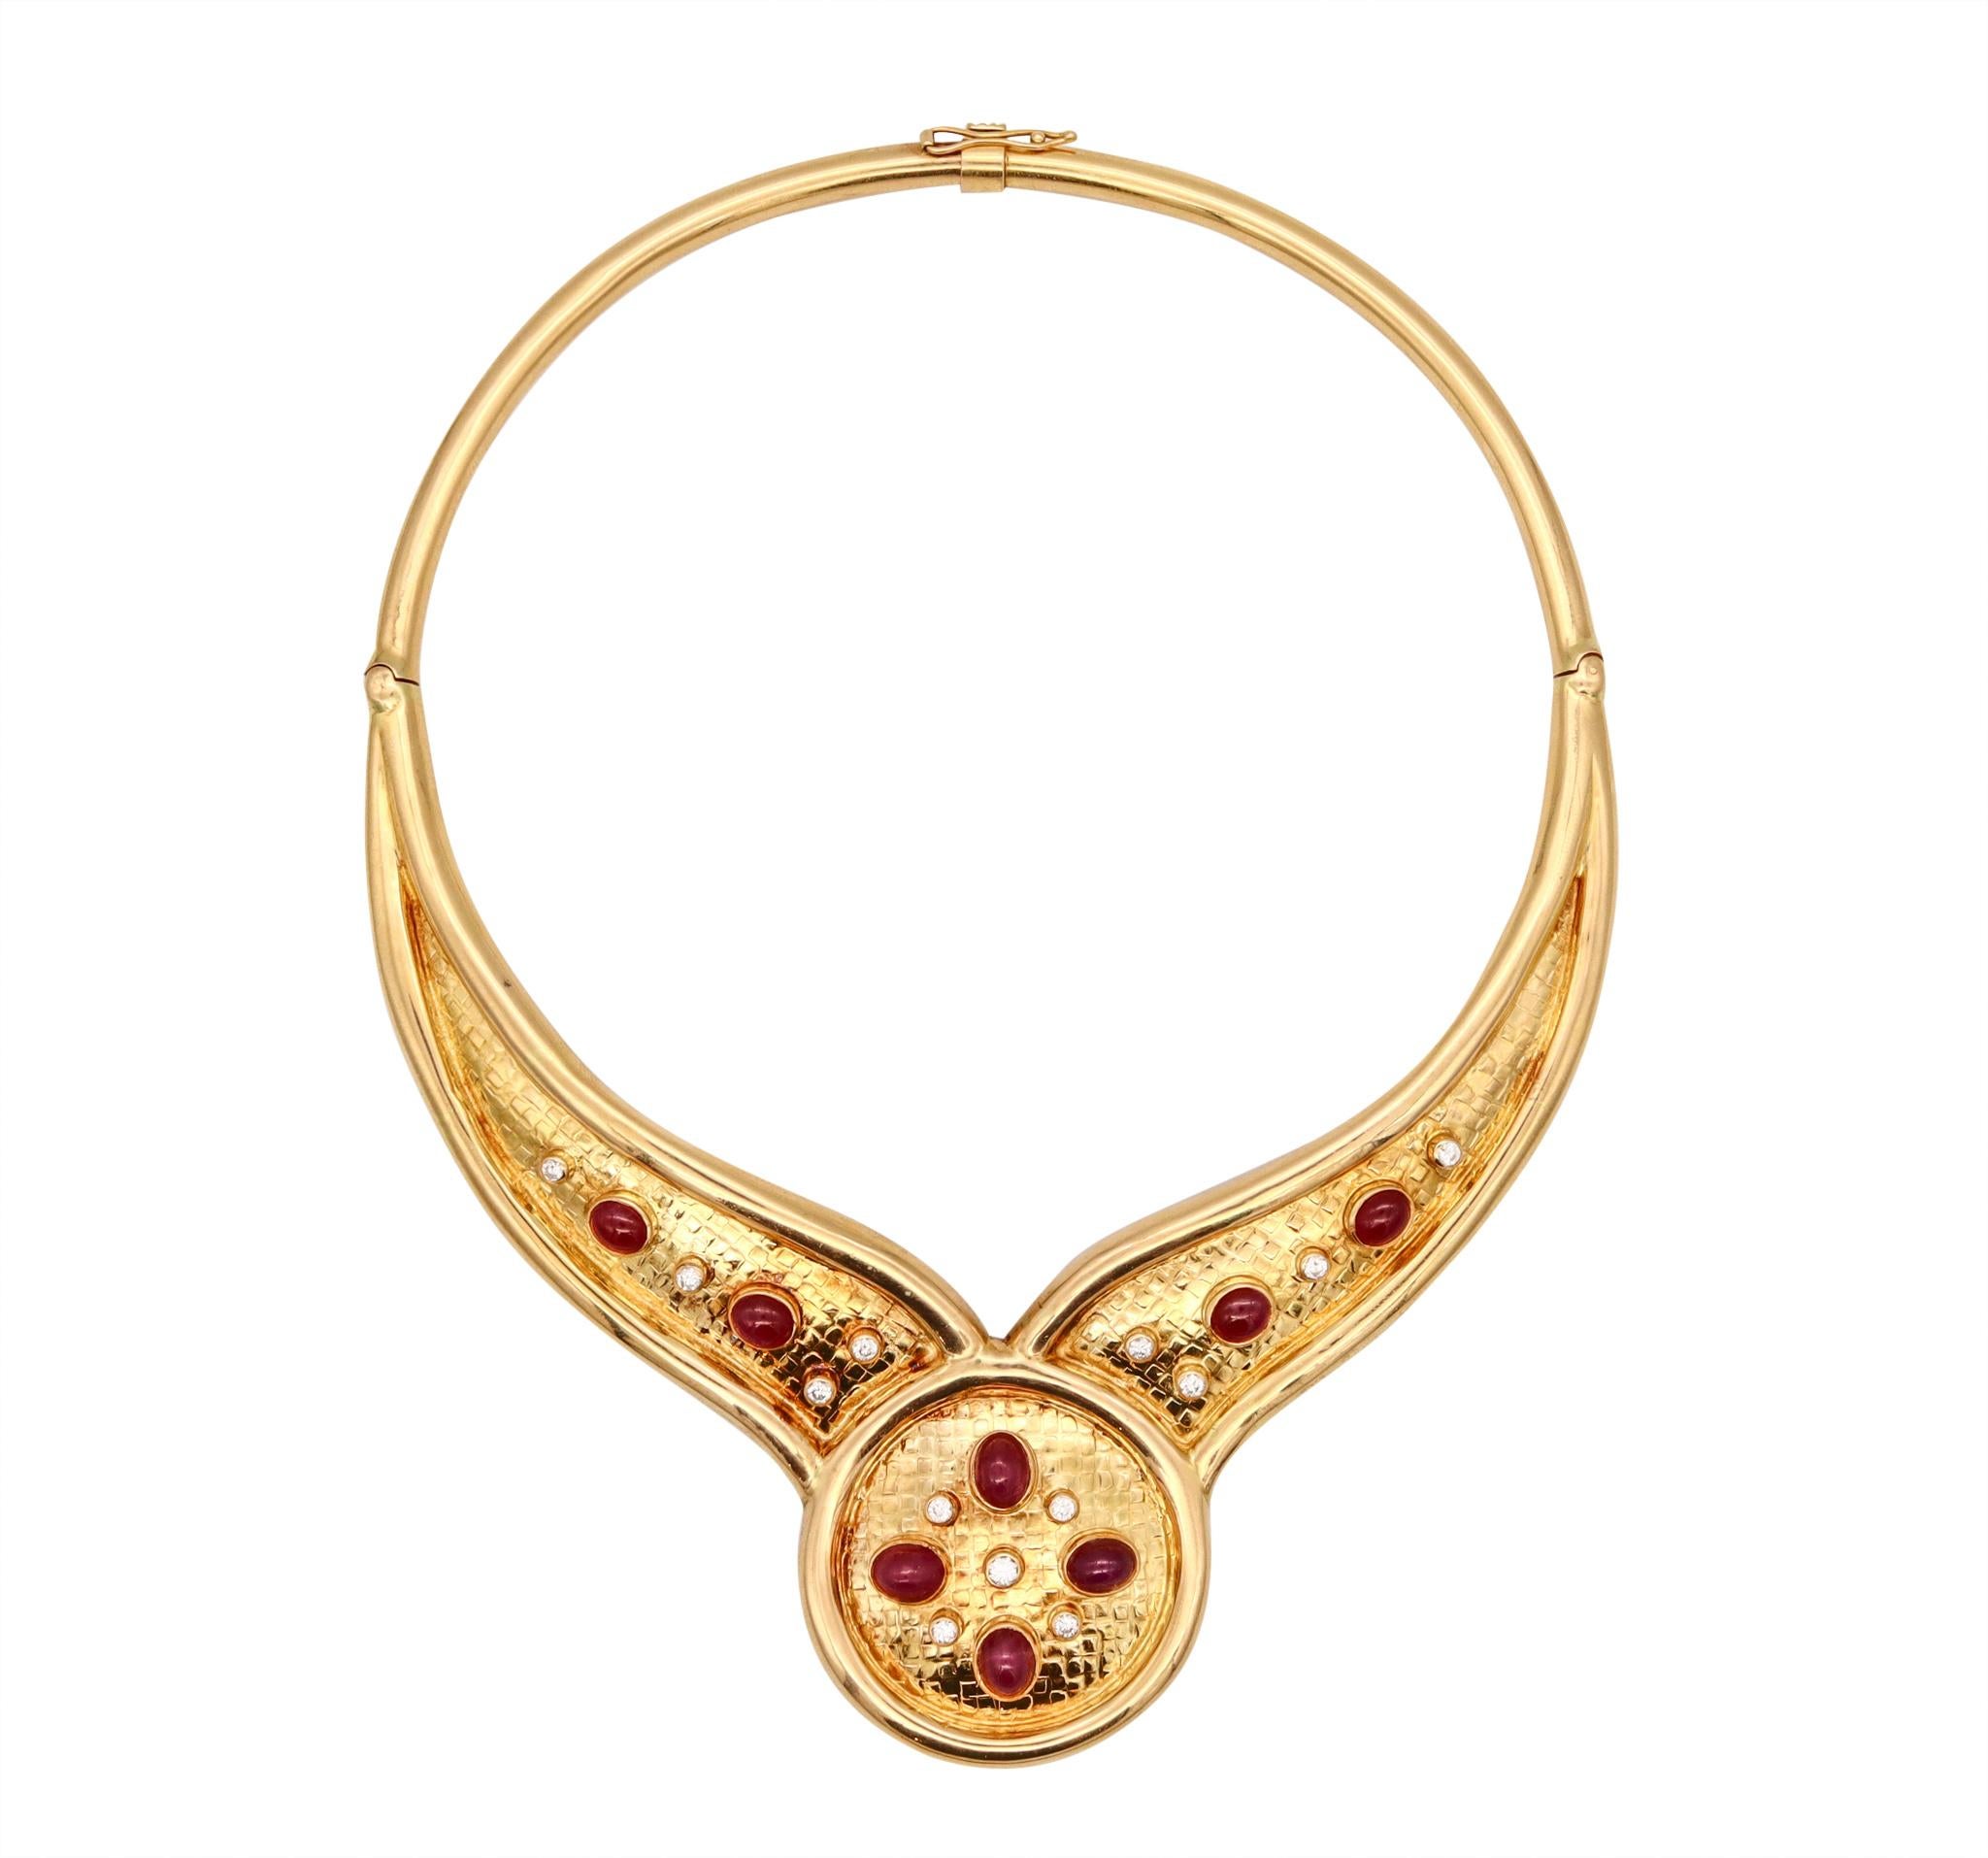 Lalaounis Greece Choker Necklace 18Kt Yellow Gold With 16.67 Cts Diamonds Rubies For Sale 2